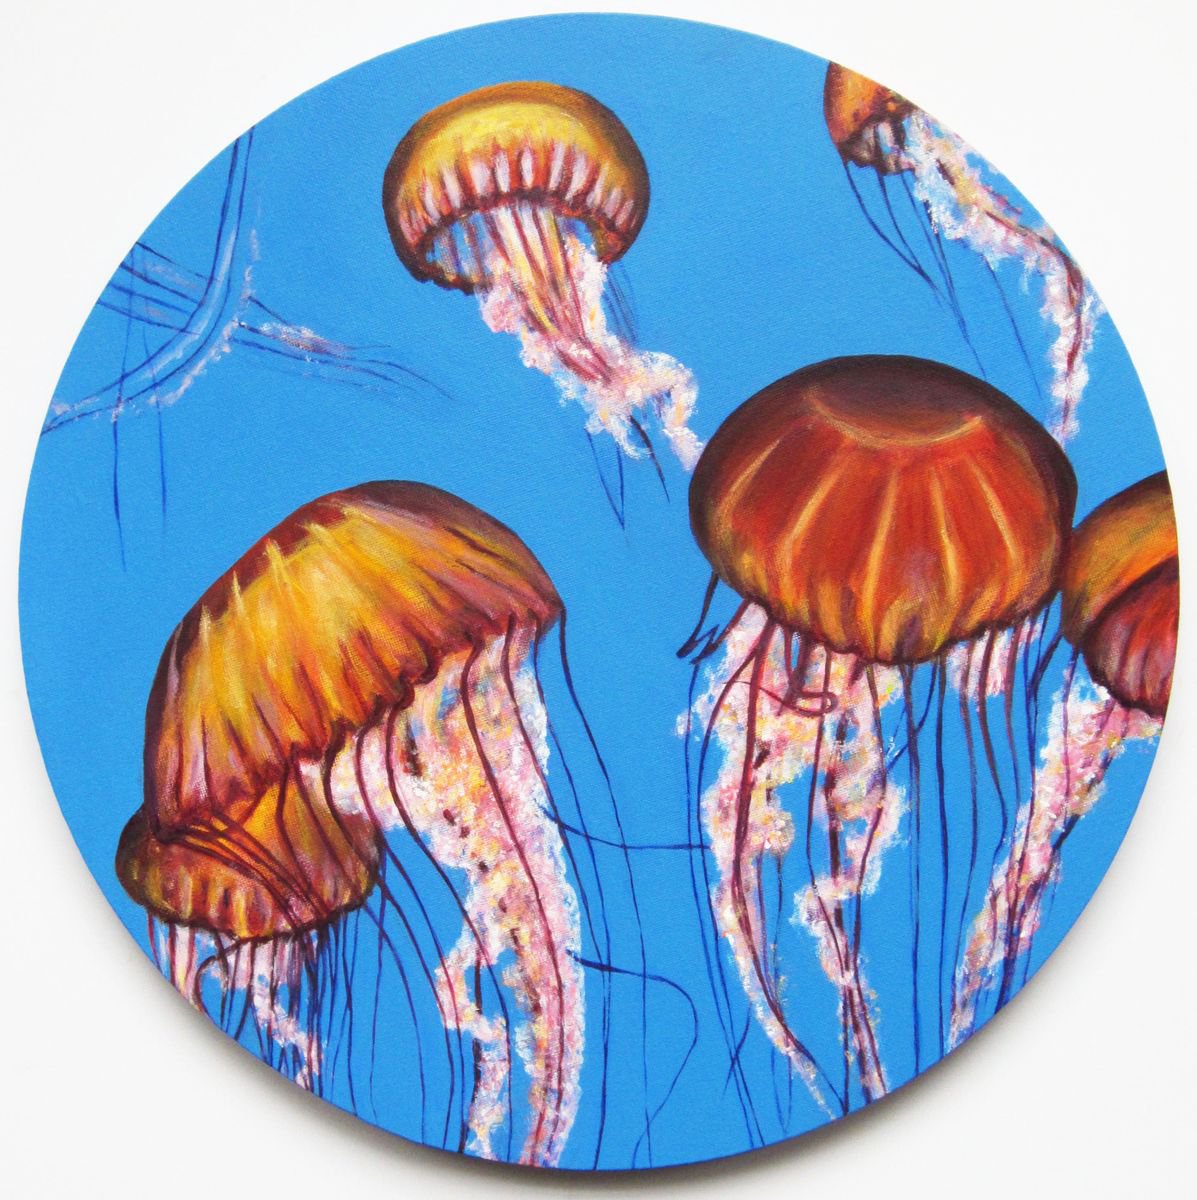 Pacific Sea Nettle Jellyfish by Jacqueline Talbot